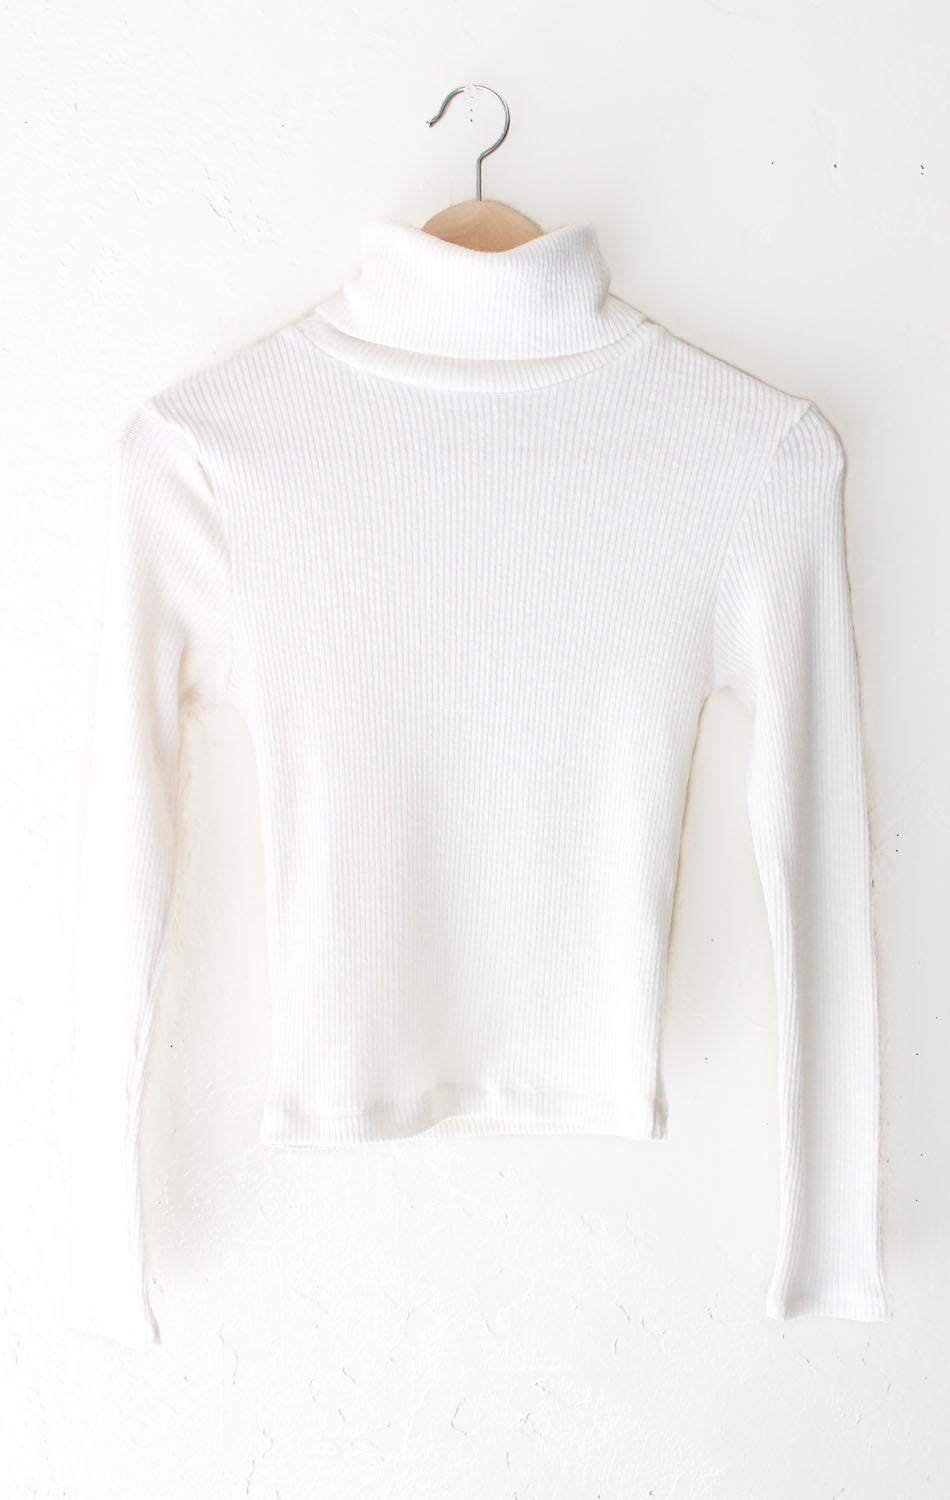 Ribbed Knit Turtleneck Crop Top - NYCT CLOTHING